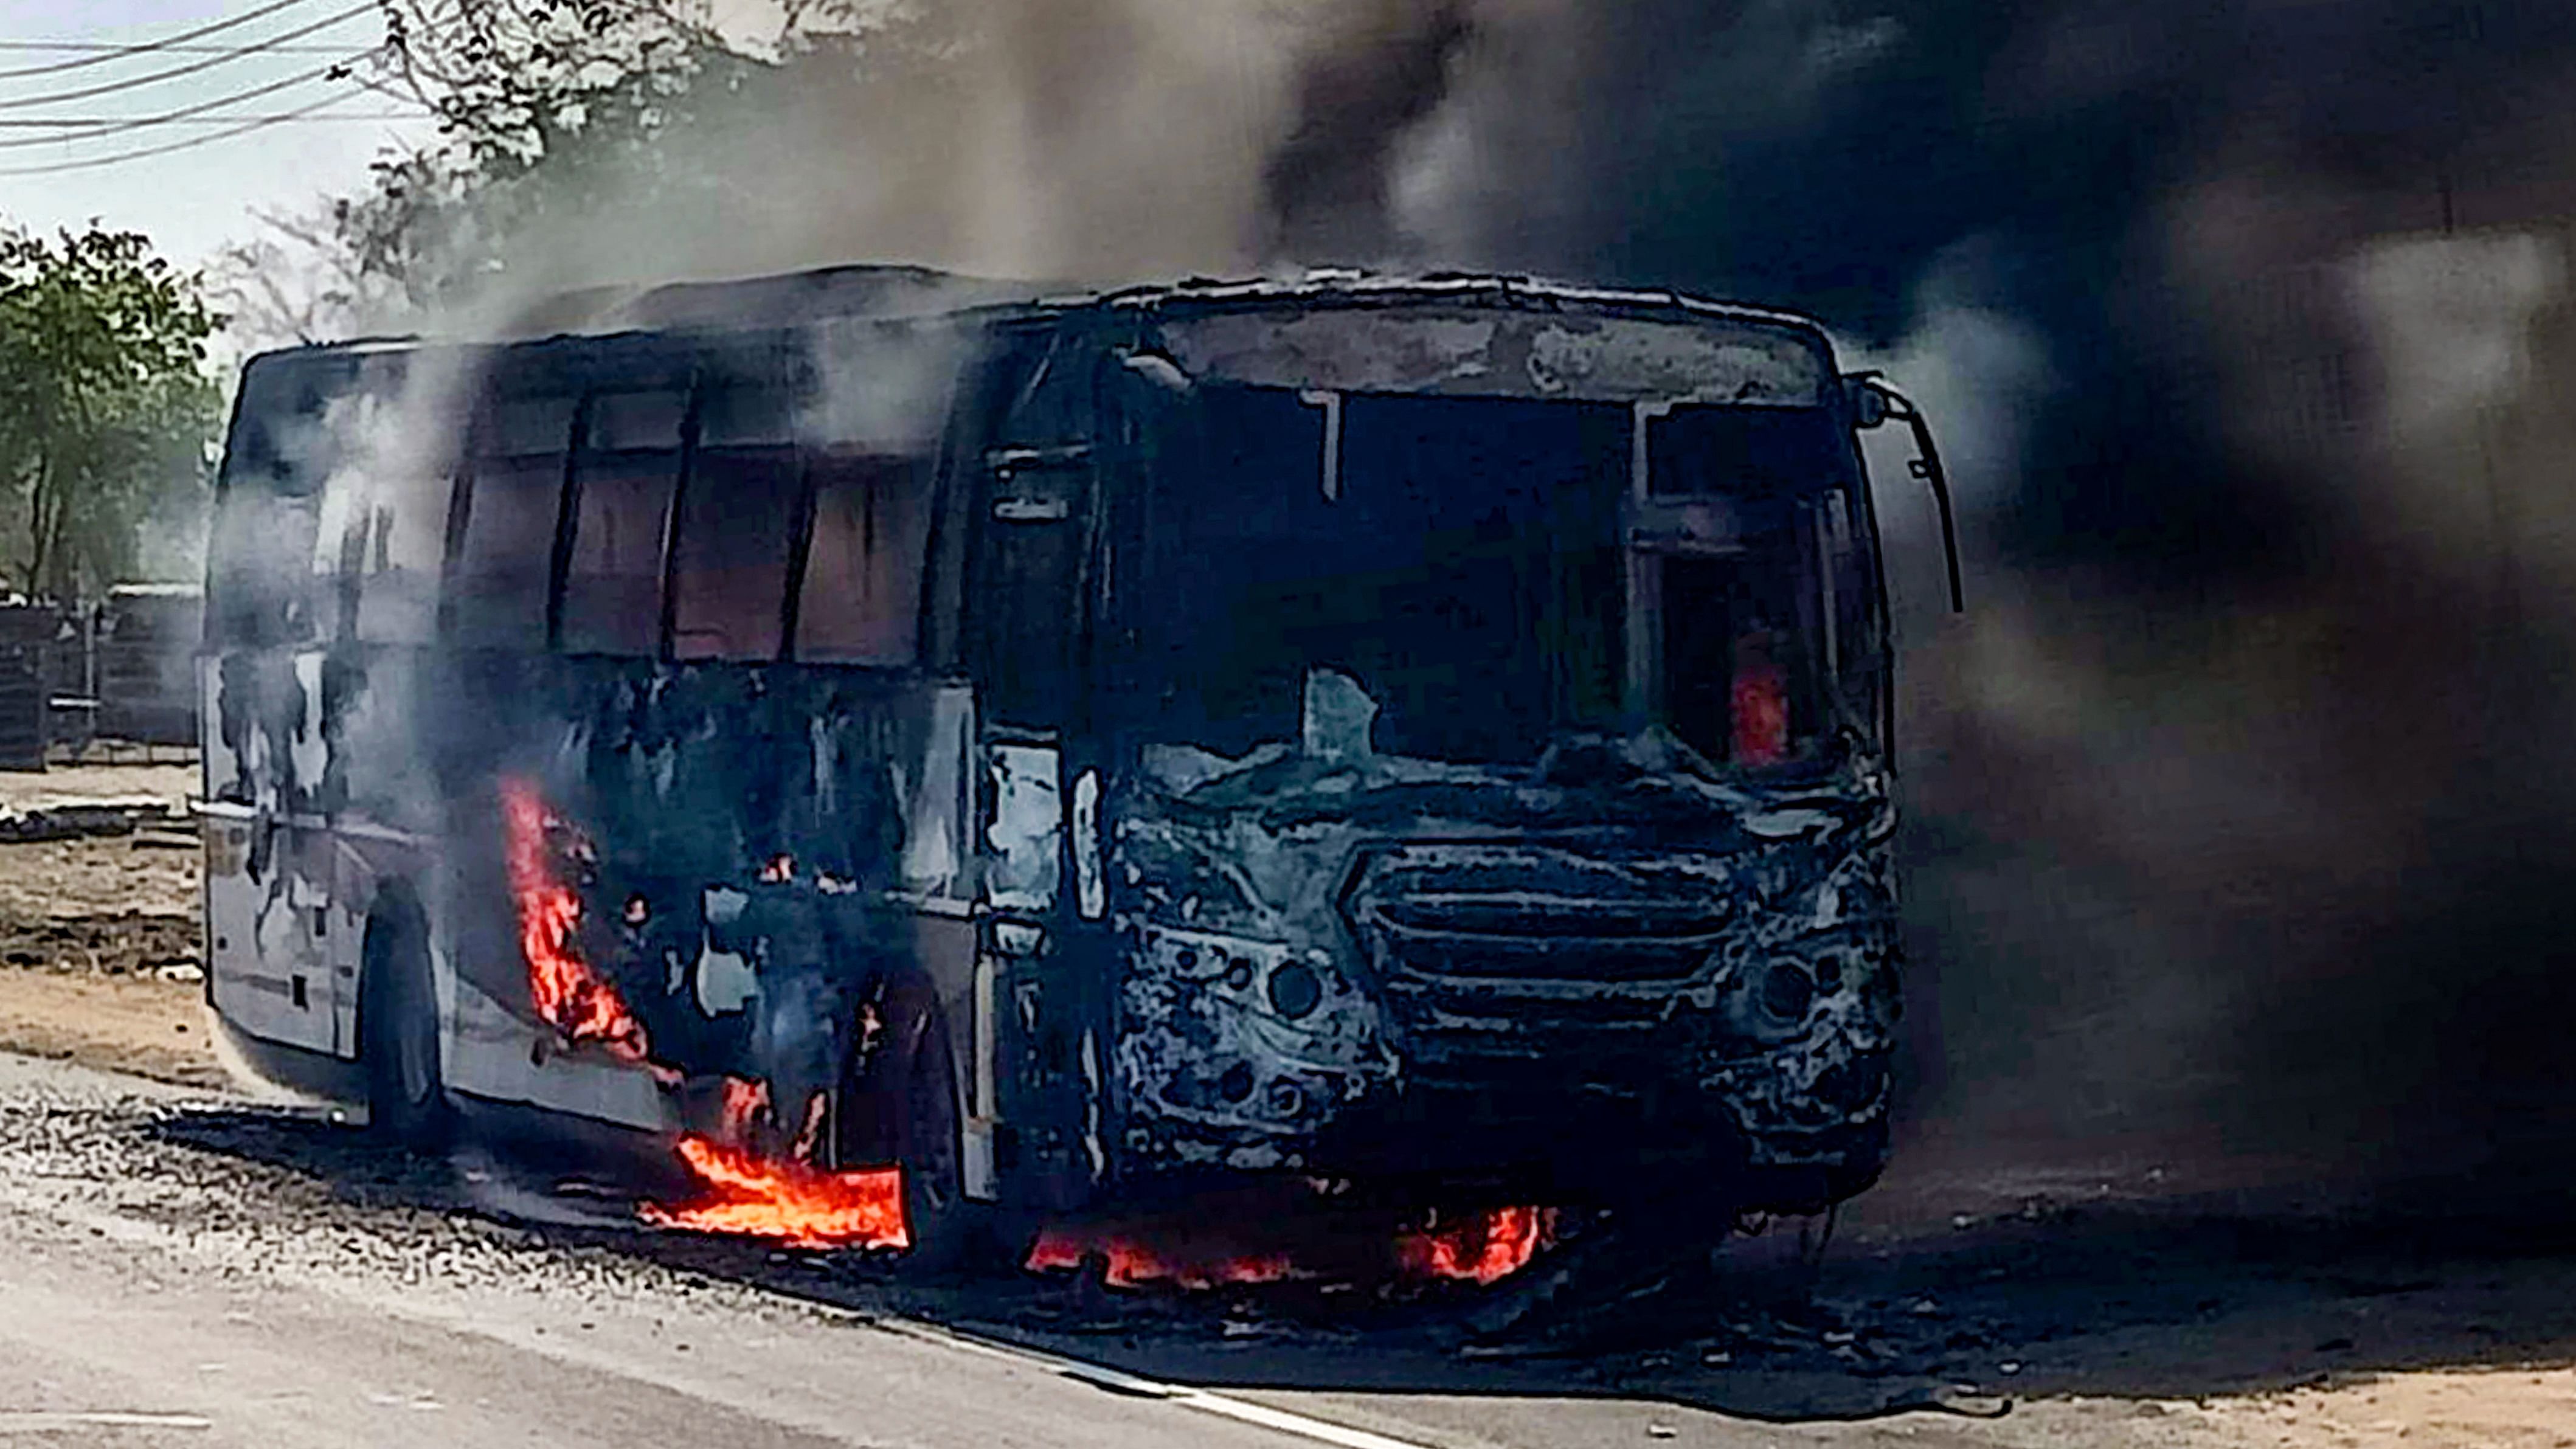 Smoke rises from an Amravati-bound Maharashtra State Road Transport Corporation (MSRTC) bus that caught fire in Nagpur district, Tuesday, April 4, 2023. Credit: PTI Photo